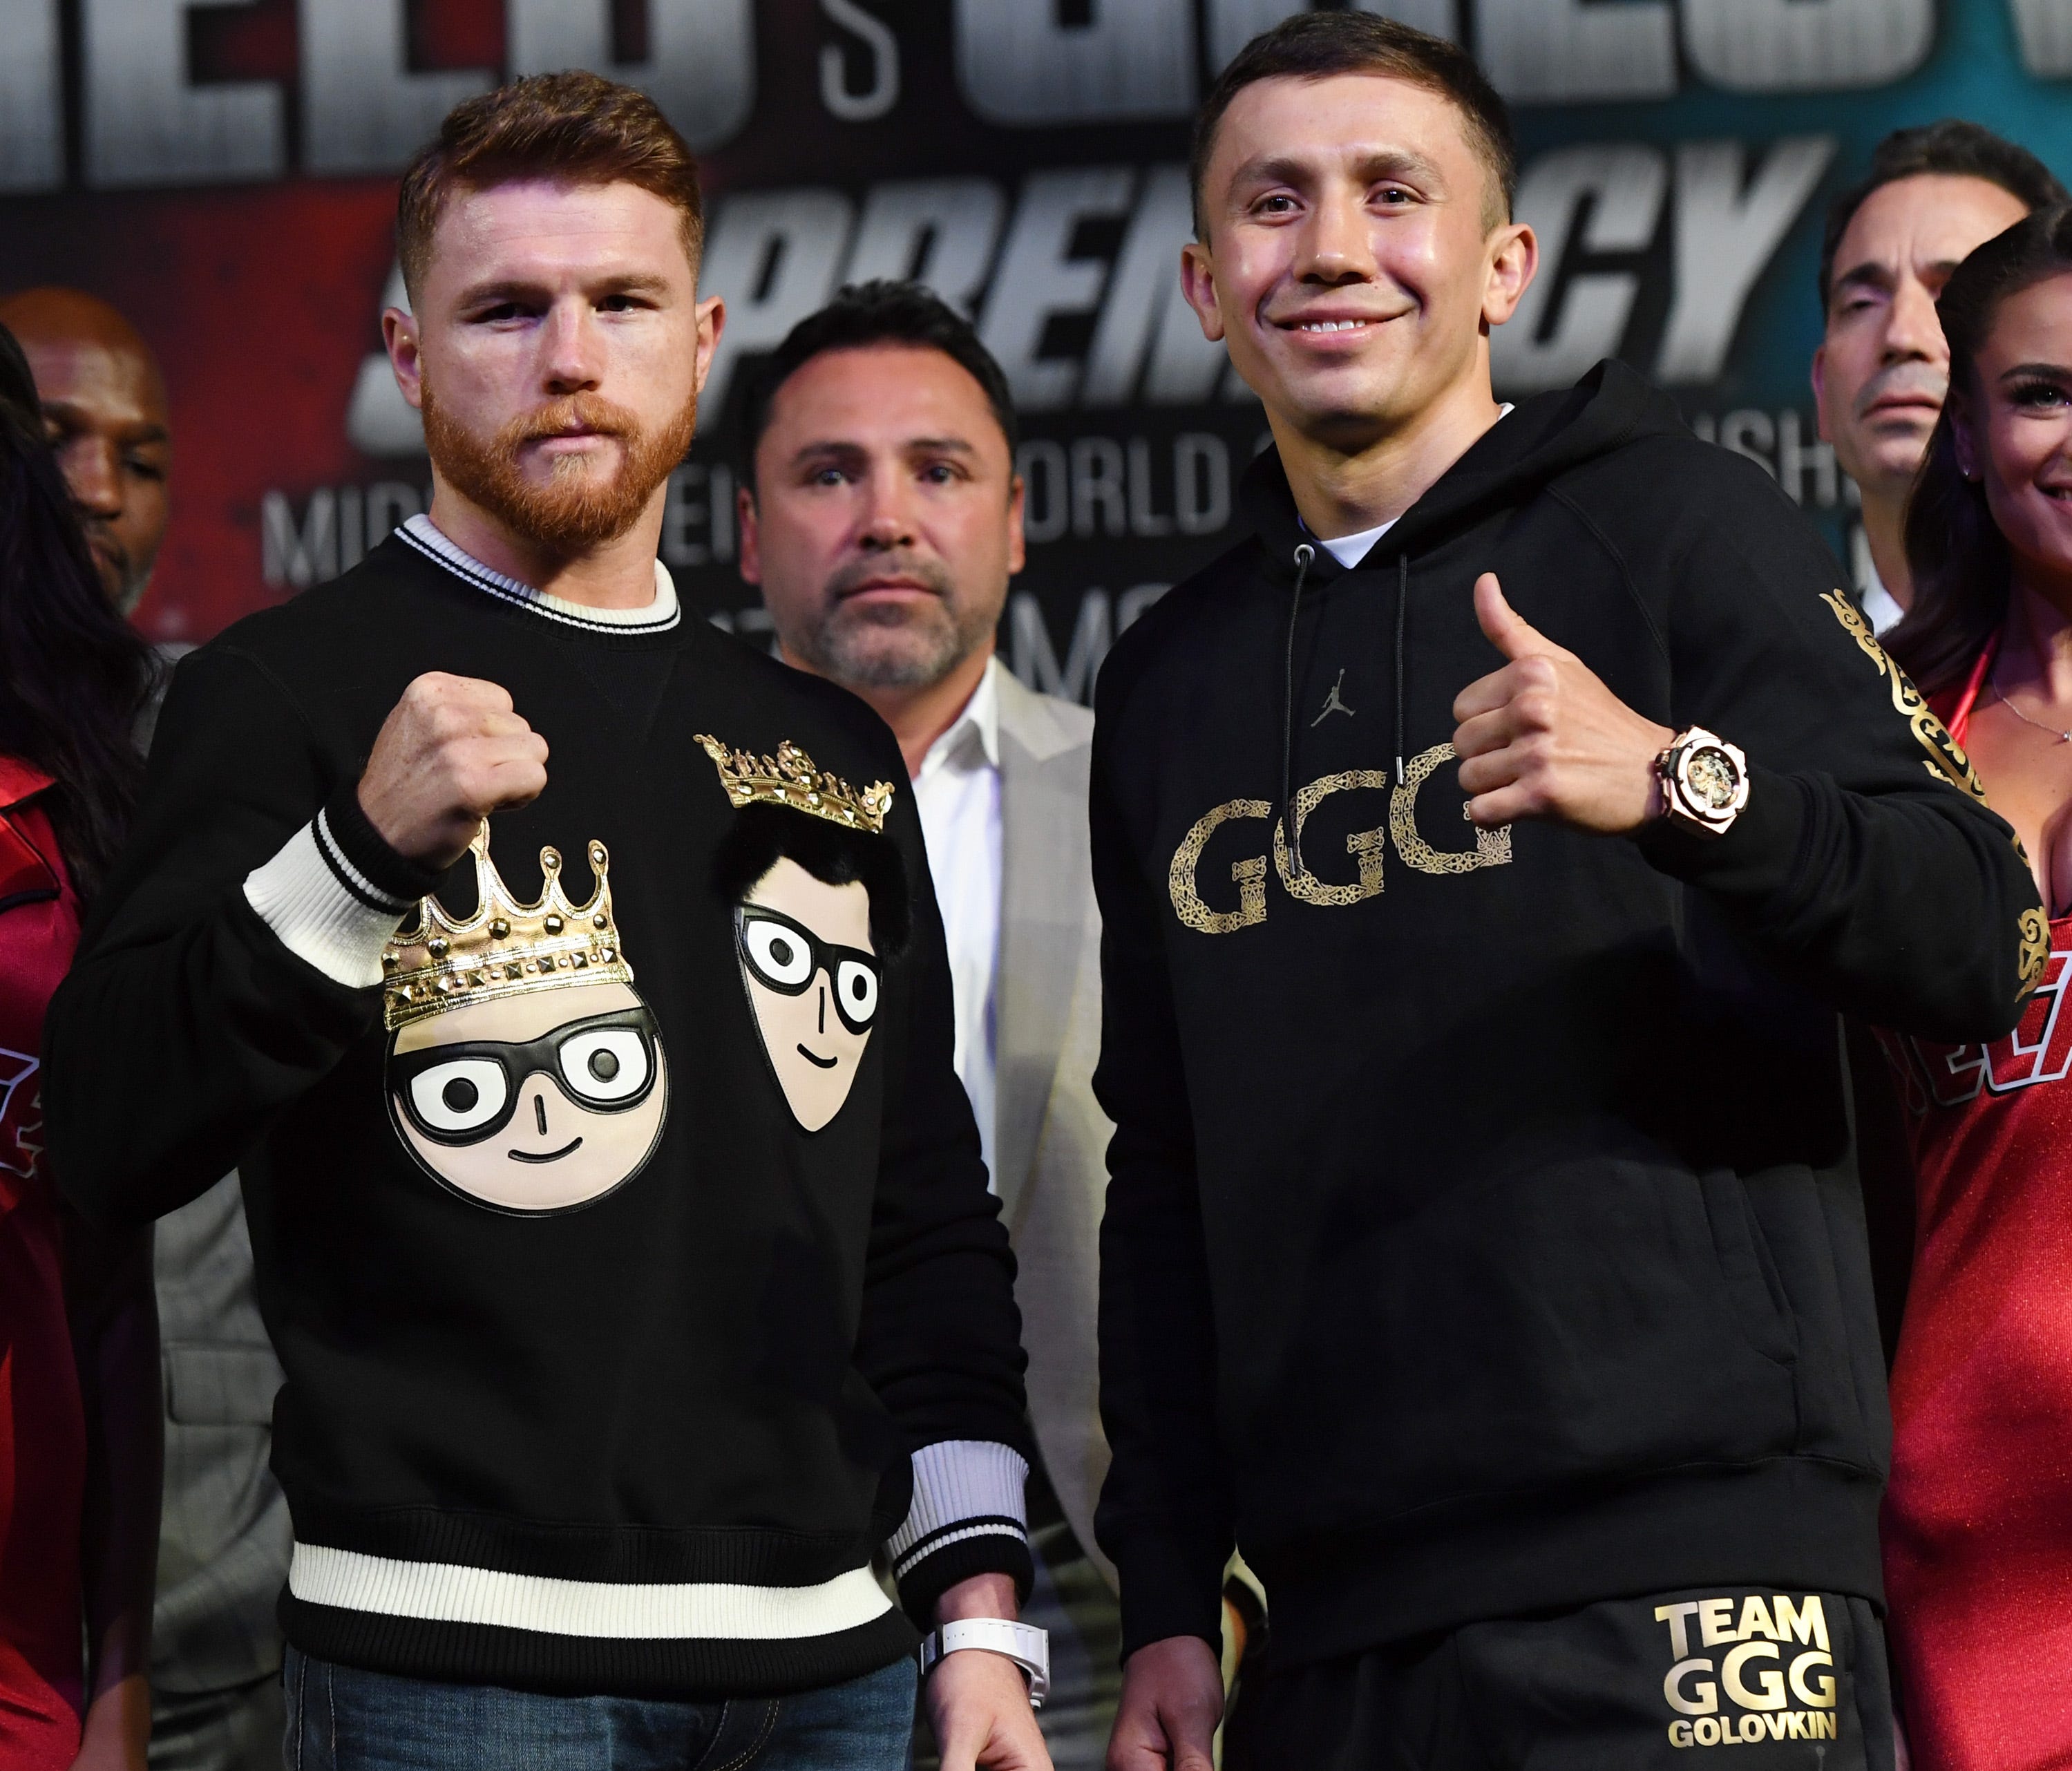 Golden Boy Promotions Chairman and CEO Oscar De La Hoya (center) looks on as Canelo Alvarez (left) and WBC, WBA and IBF middleweight champion Gennady Golovkin pose during a news conference at MGM Grand Hotel & Casino on Sept. 12, 2017 in Las Vegas.